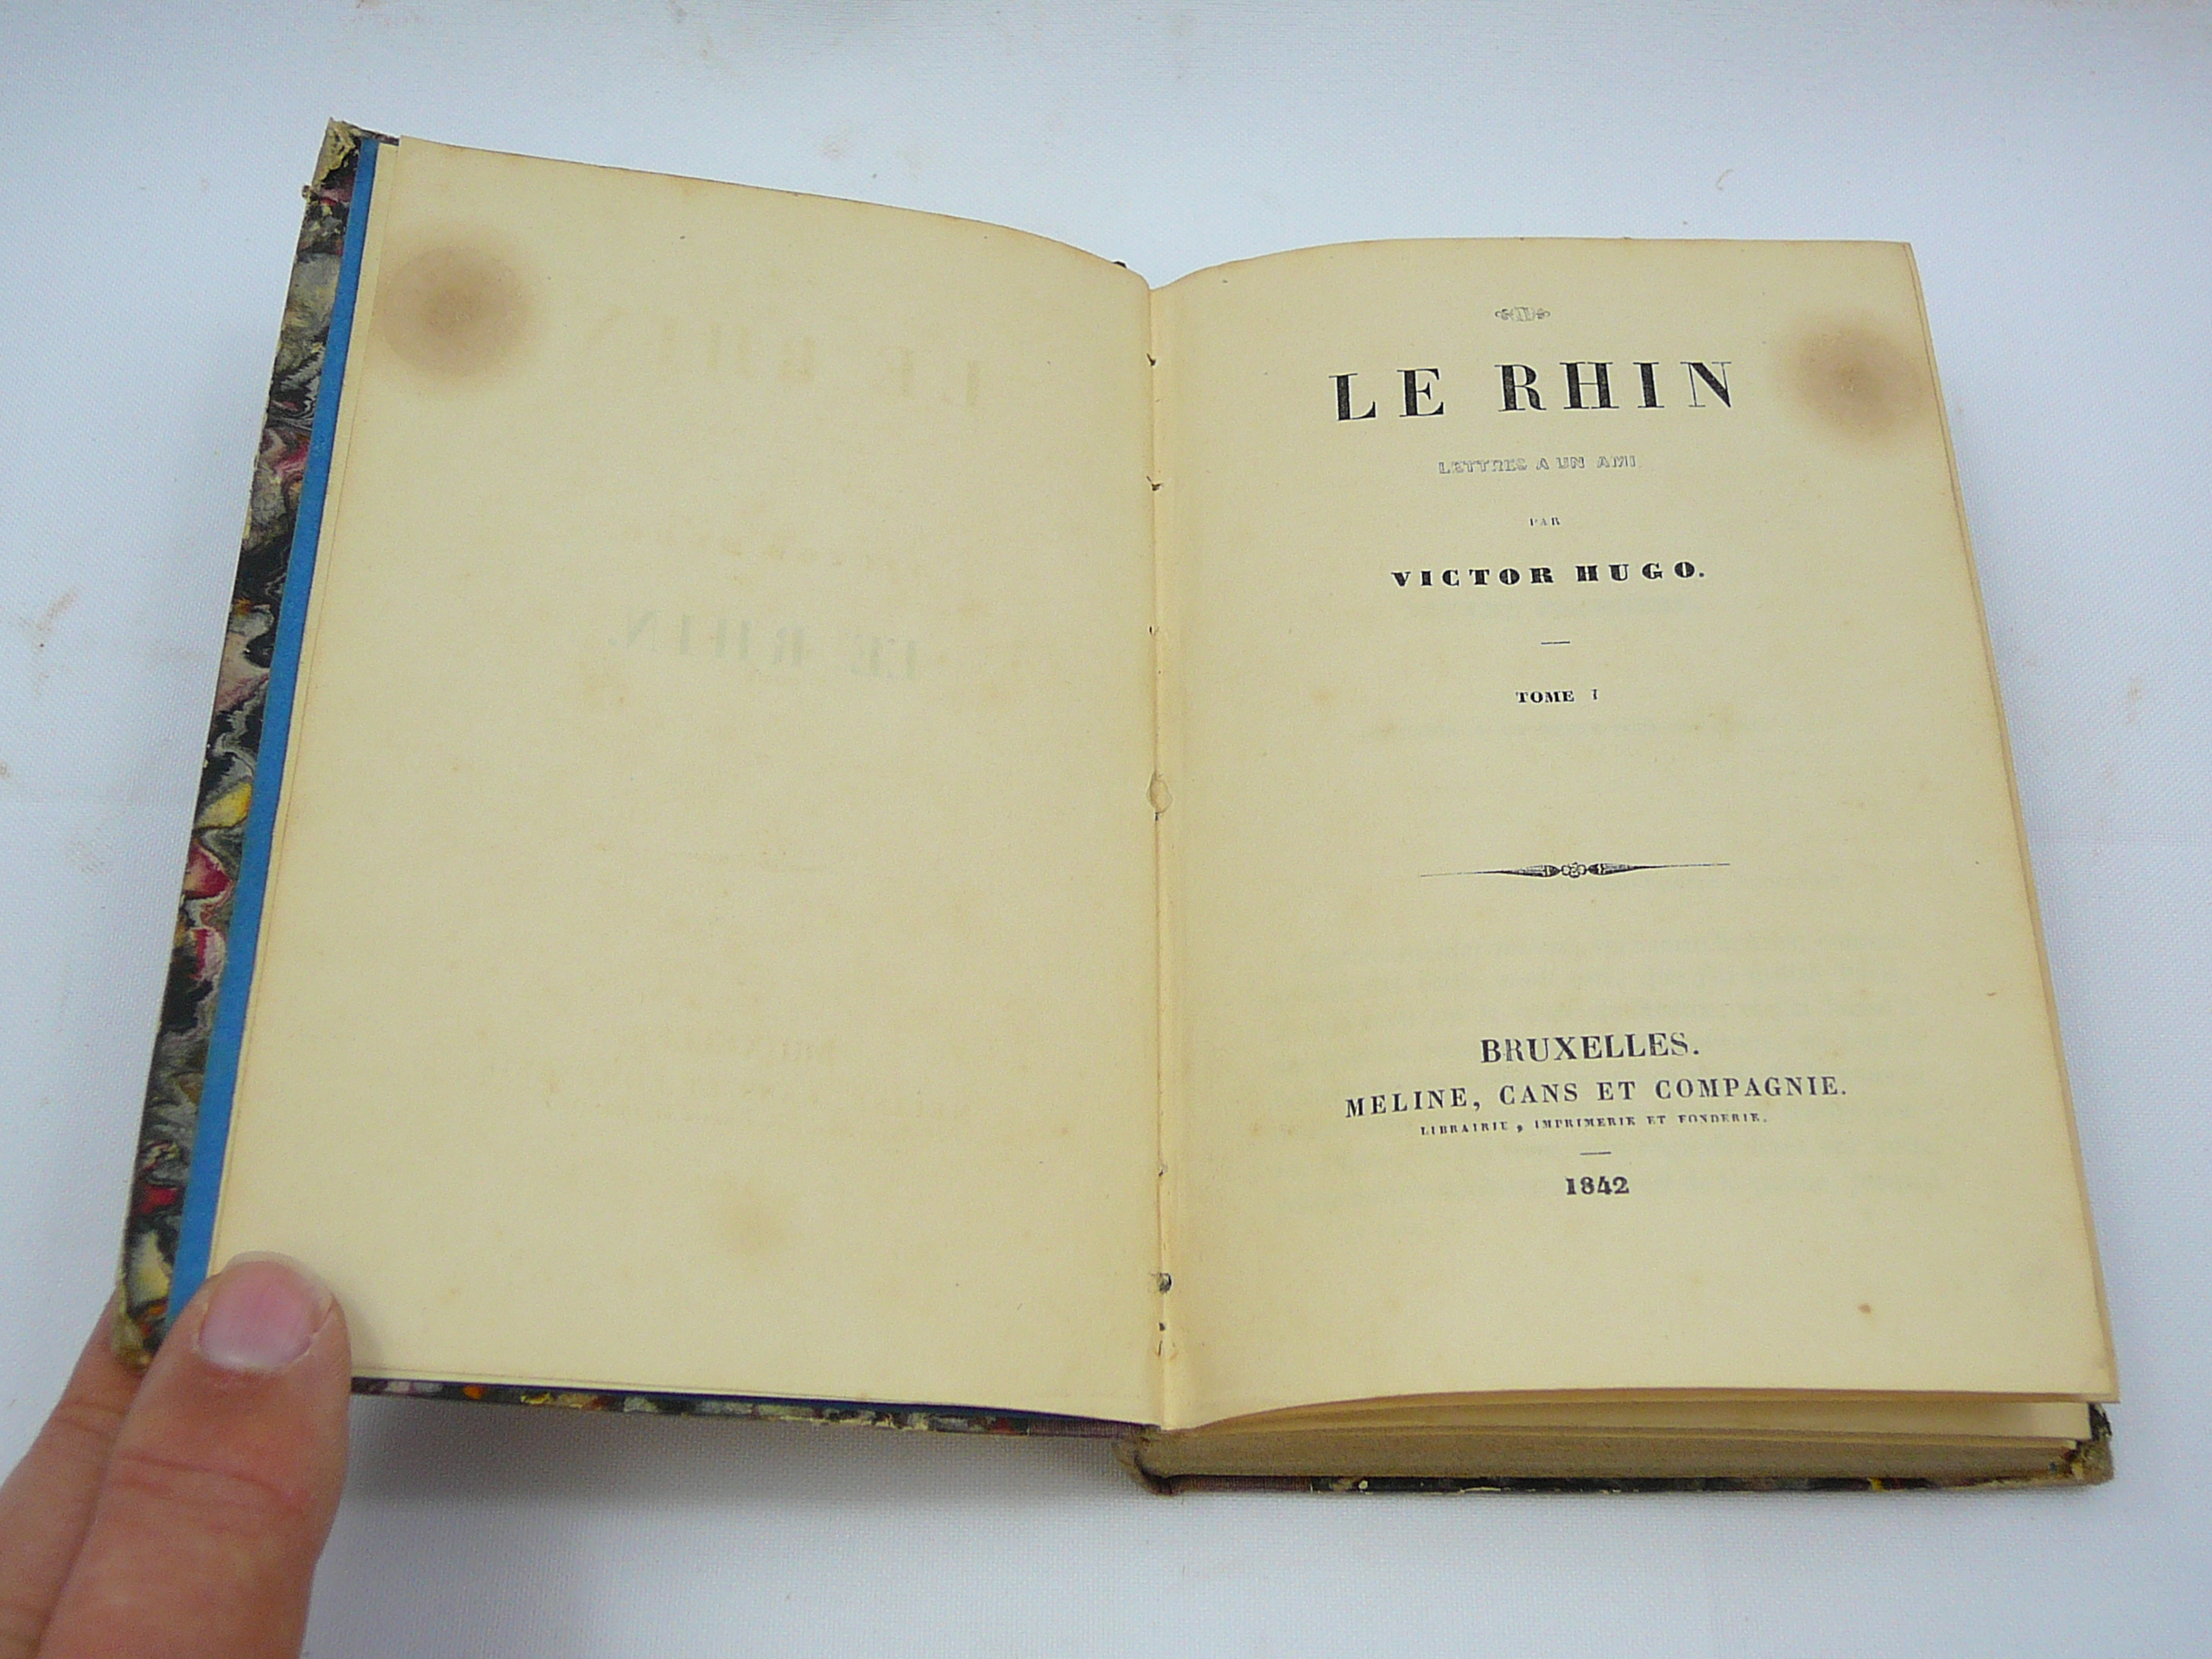 Mid 19th Copy of Le Rhin by Victor Hugo (2 volumes) - Image 7 of 7